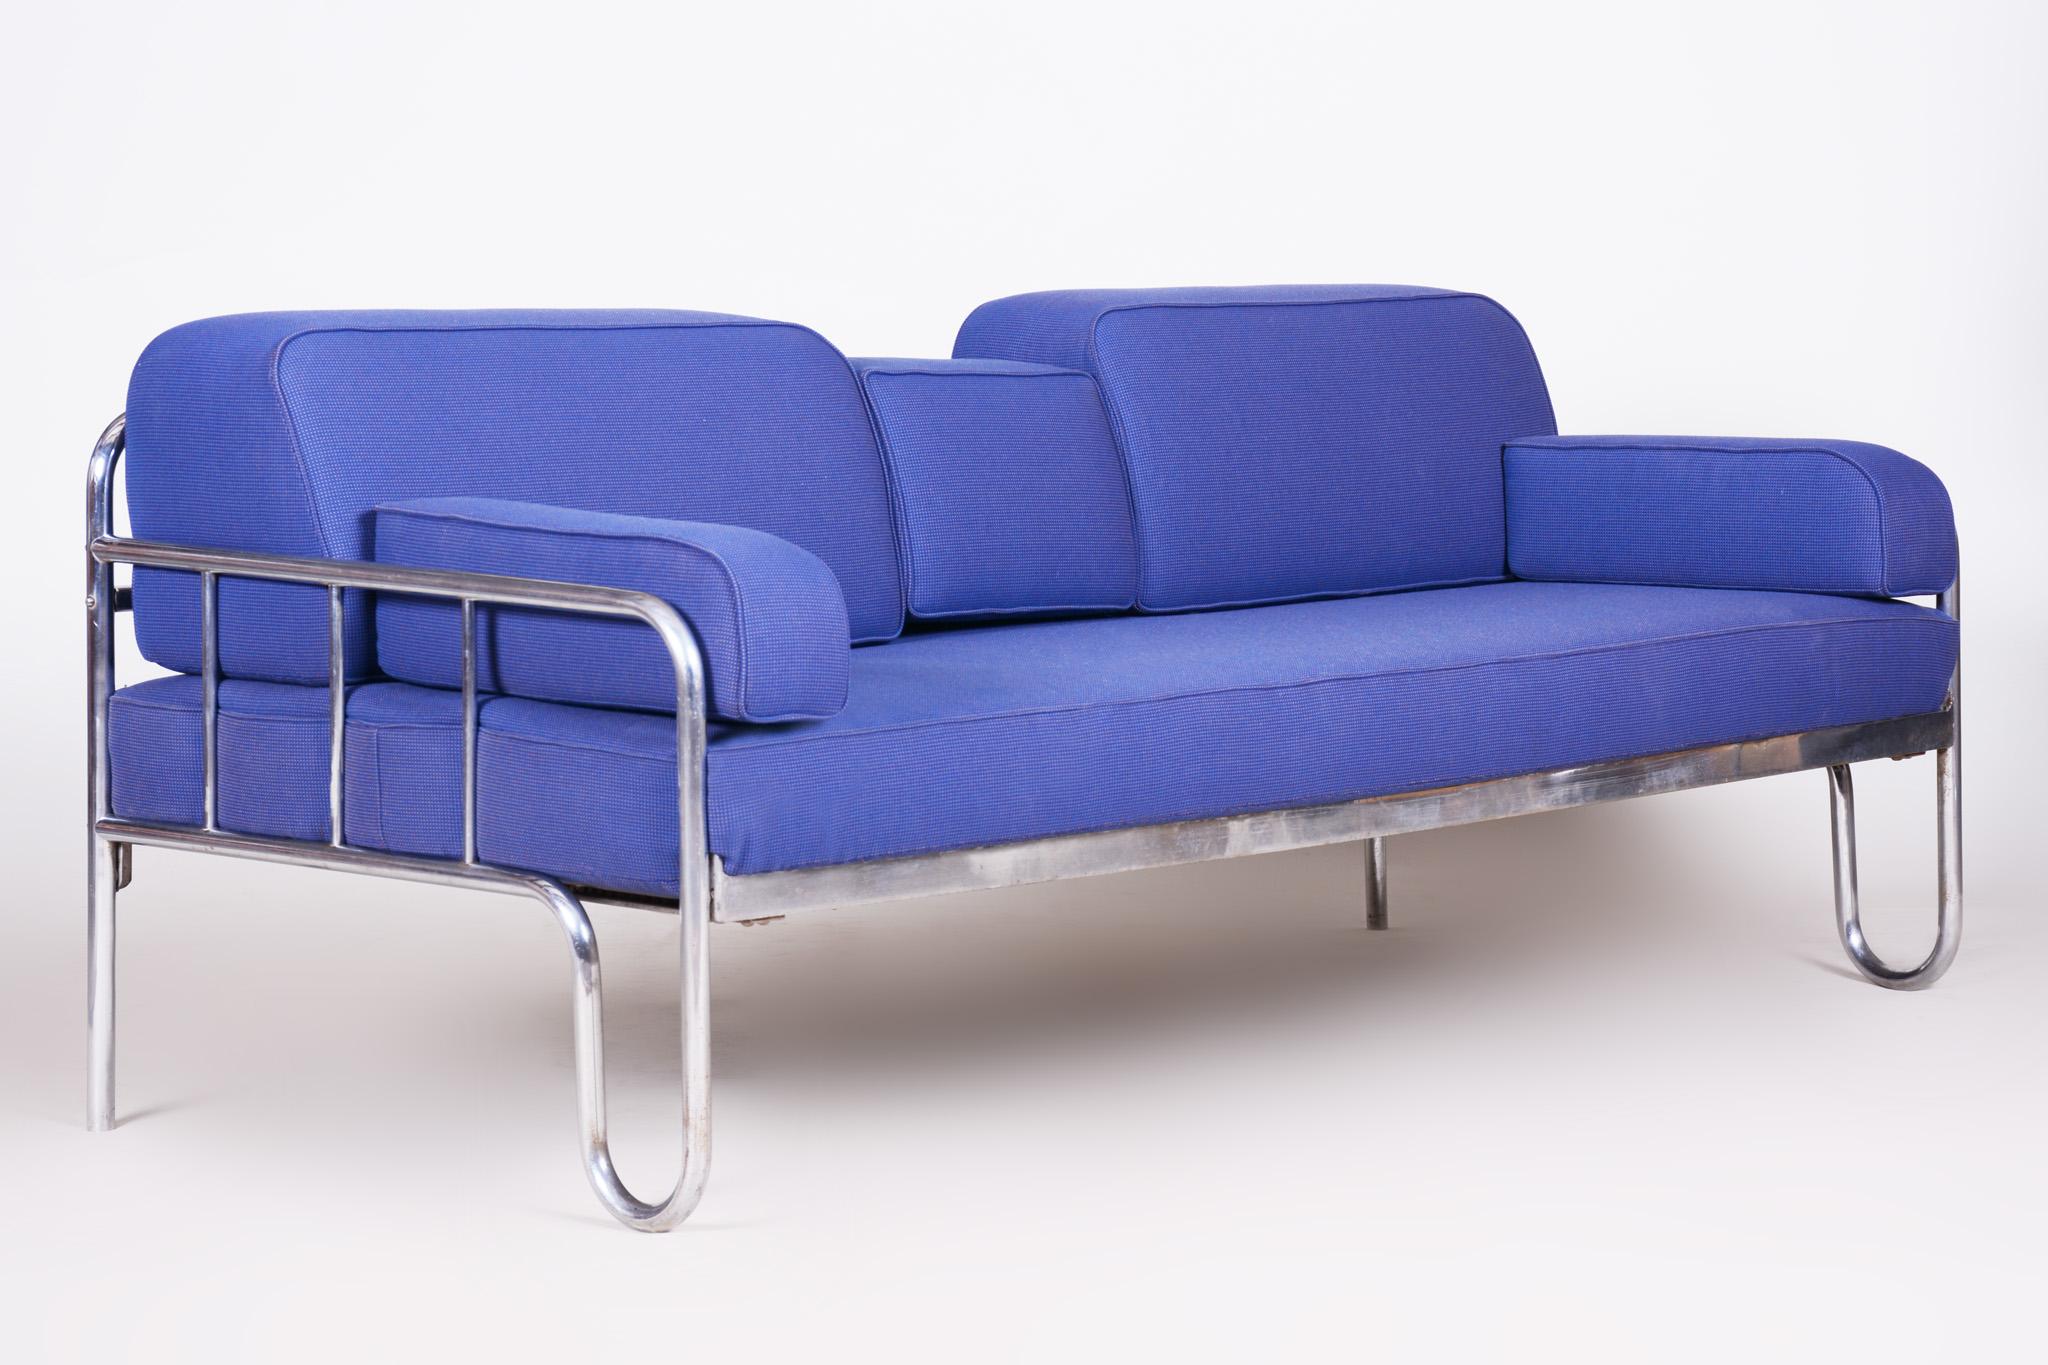 Fully Restored Blue Bauhaus Chrome Sofa, 1930s Czechia In Good Condition For Sale In Horomerice, CZ